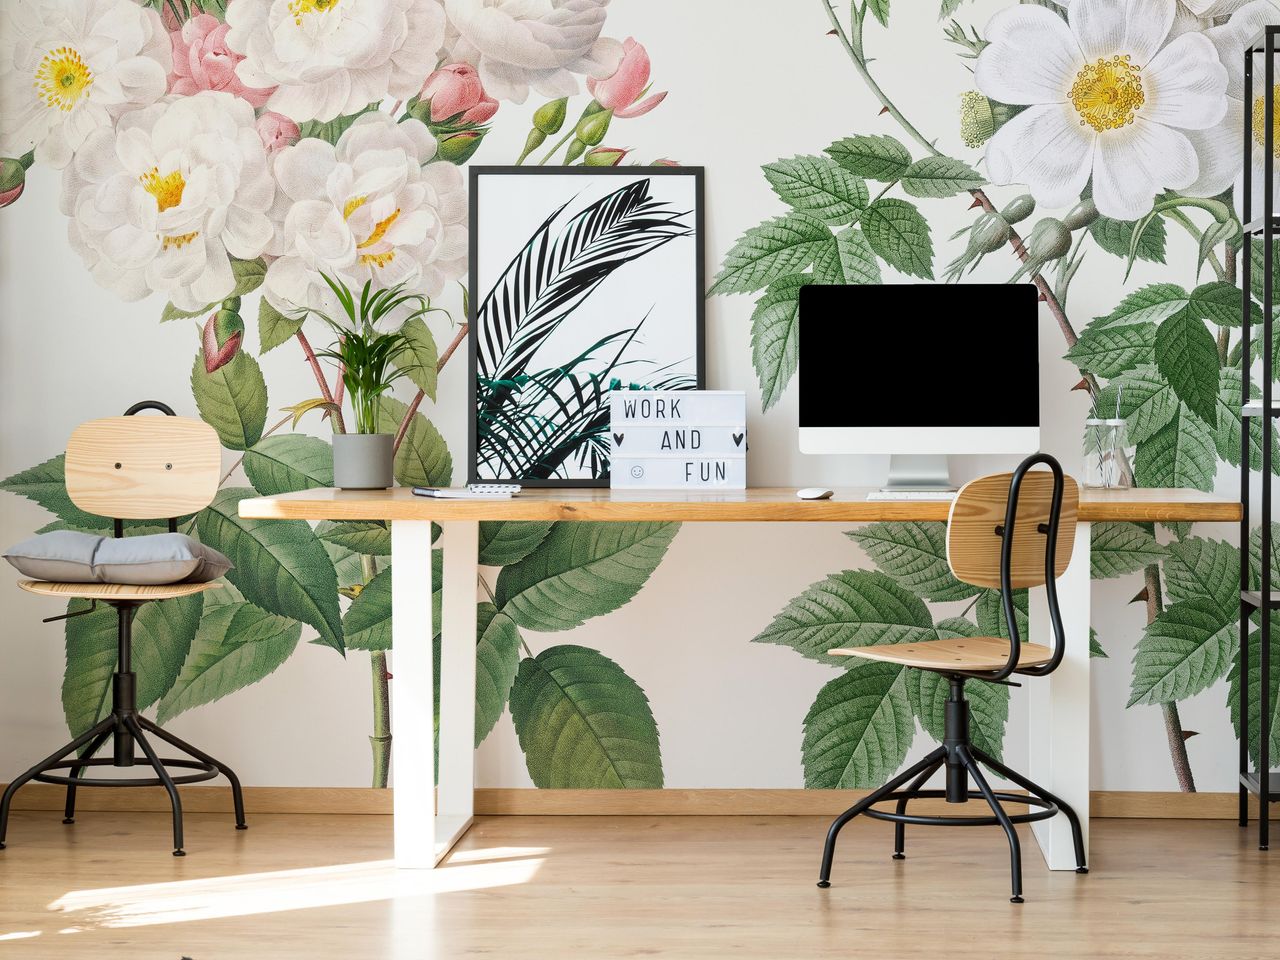 Spring Wallpaper Trends to Elevate Your Home Decor